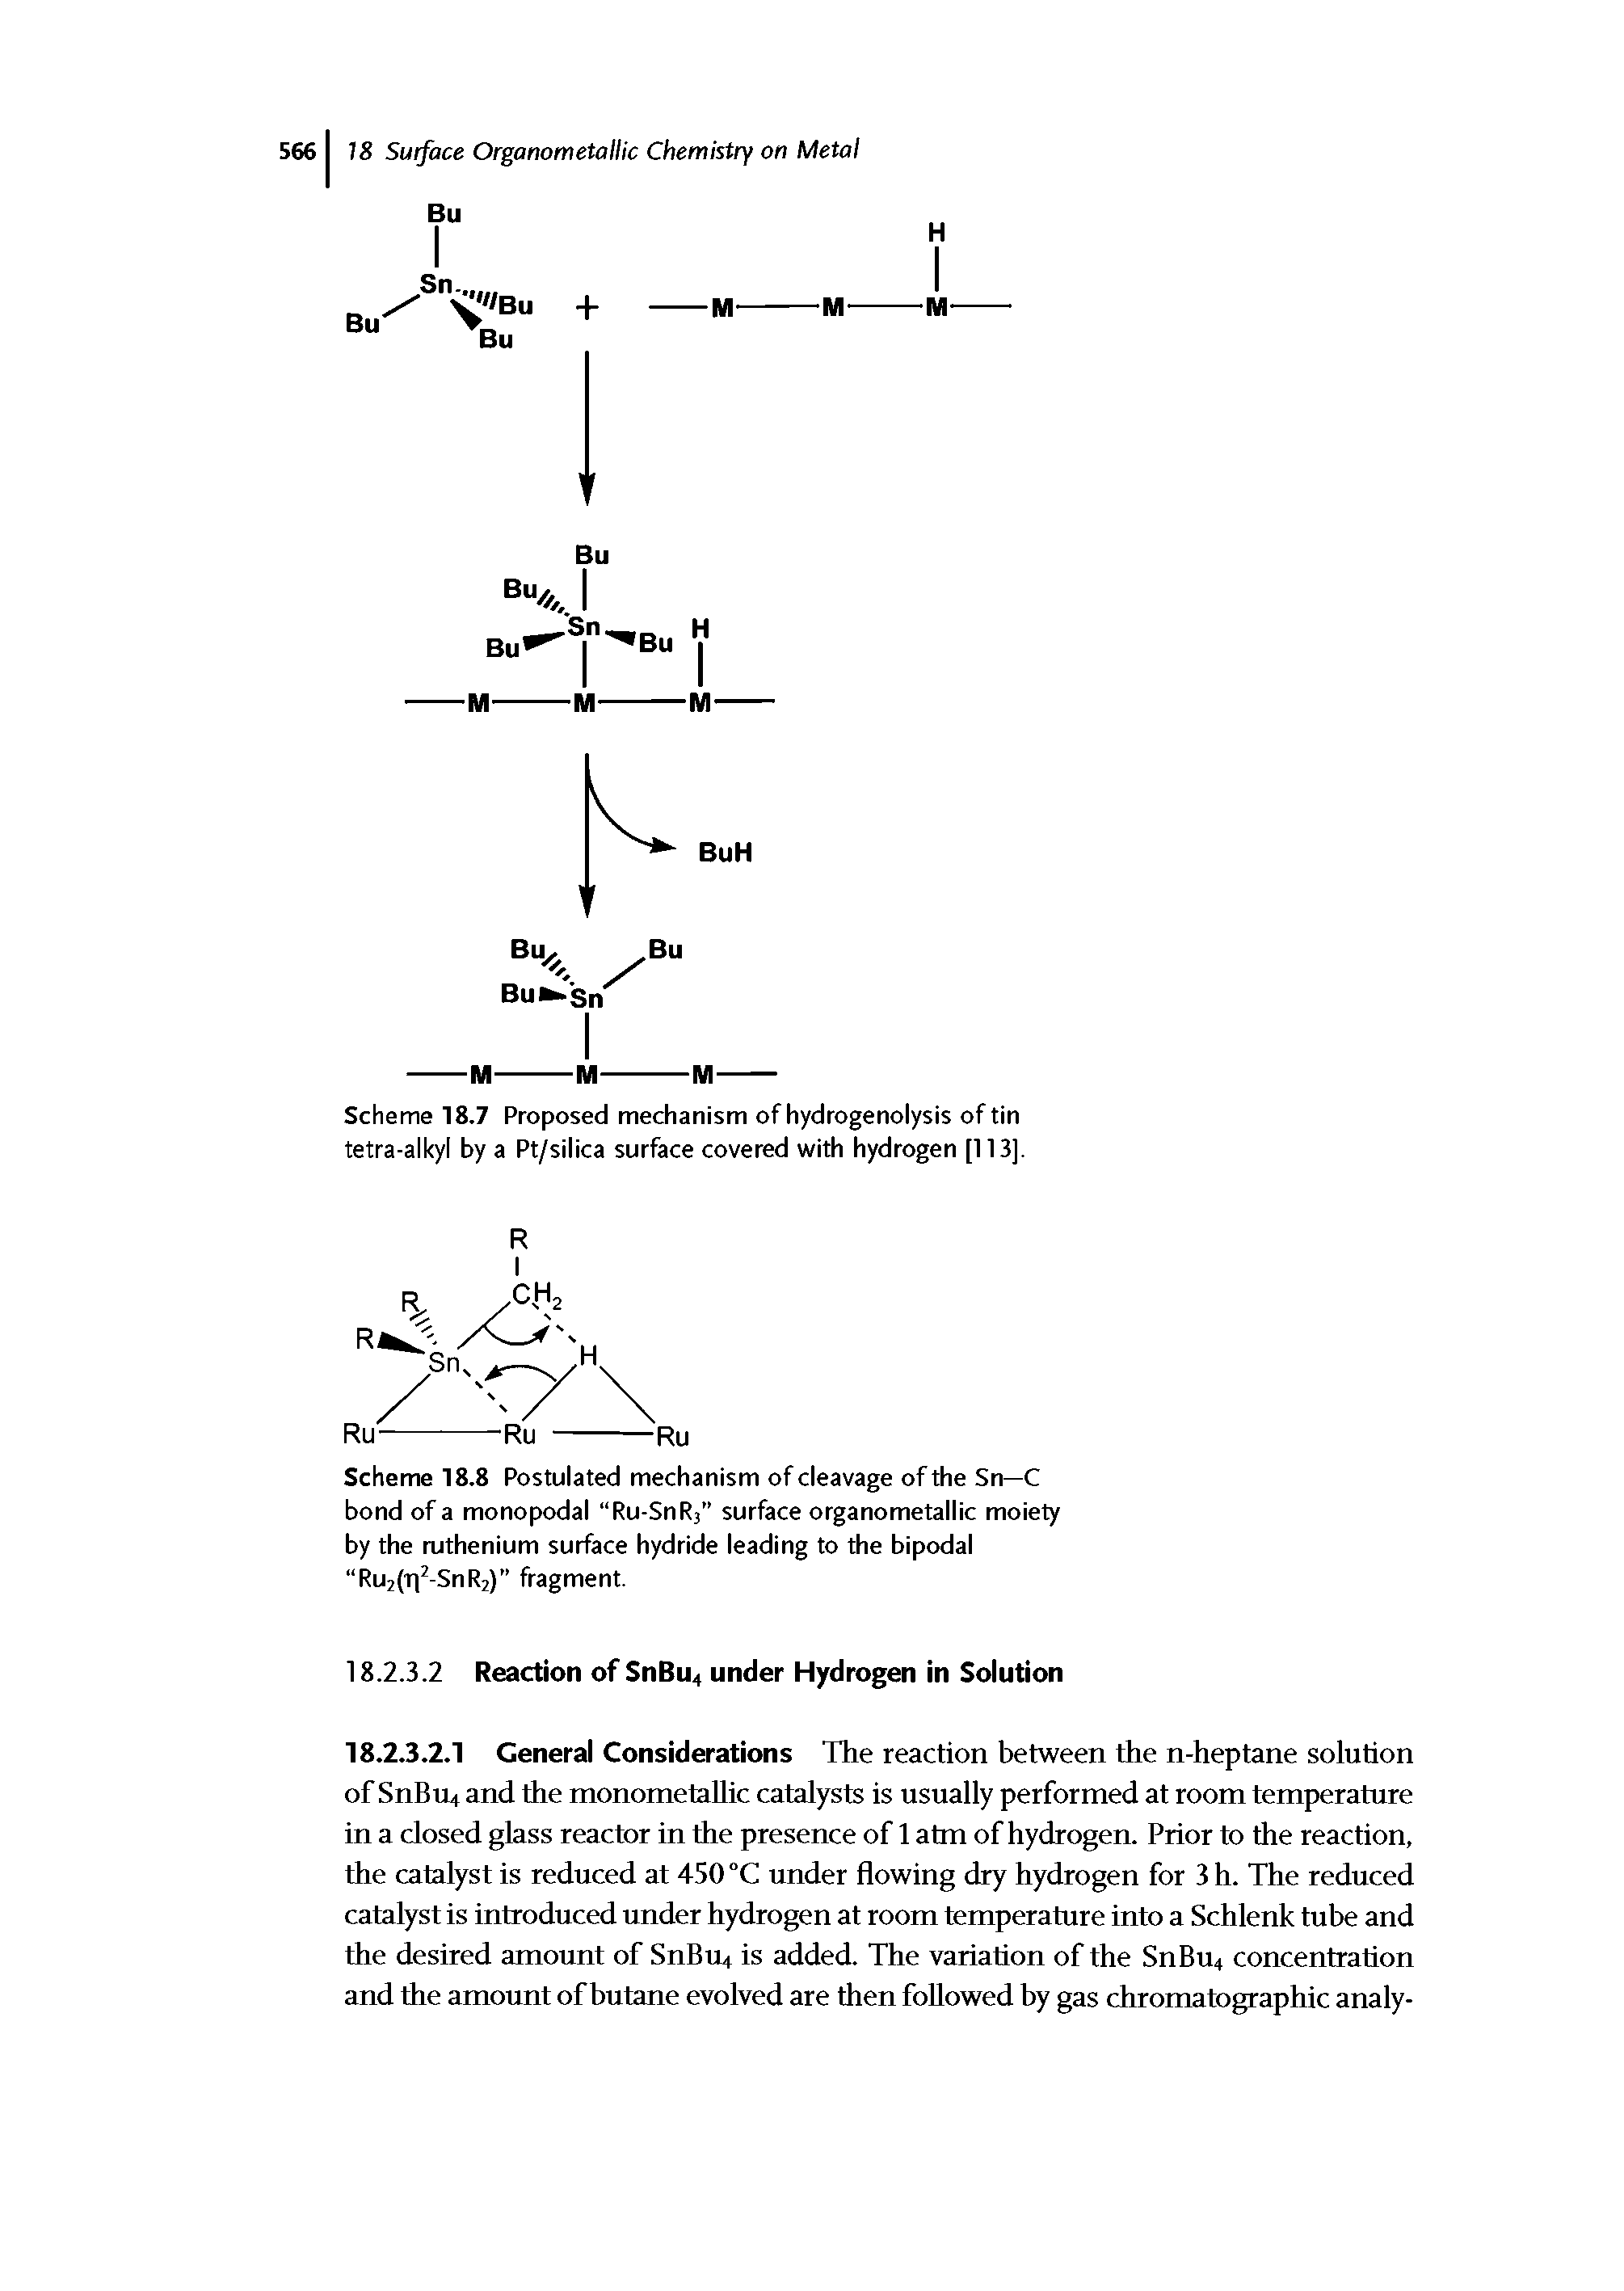 Scheme 18.7 Proposed mechanism of hydrogenolysis of tin tetra-alkyl by a Pt/silica surface covered with hydrogen [113],...